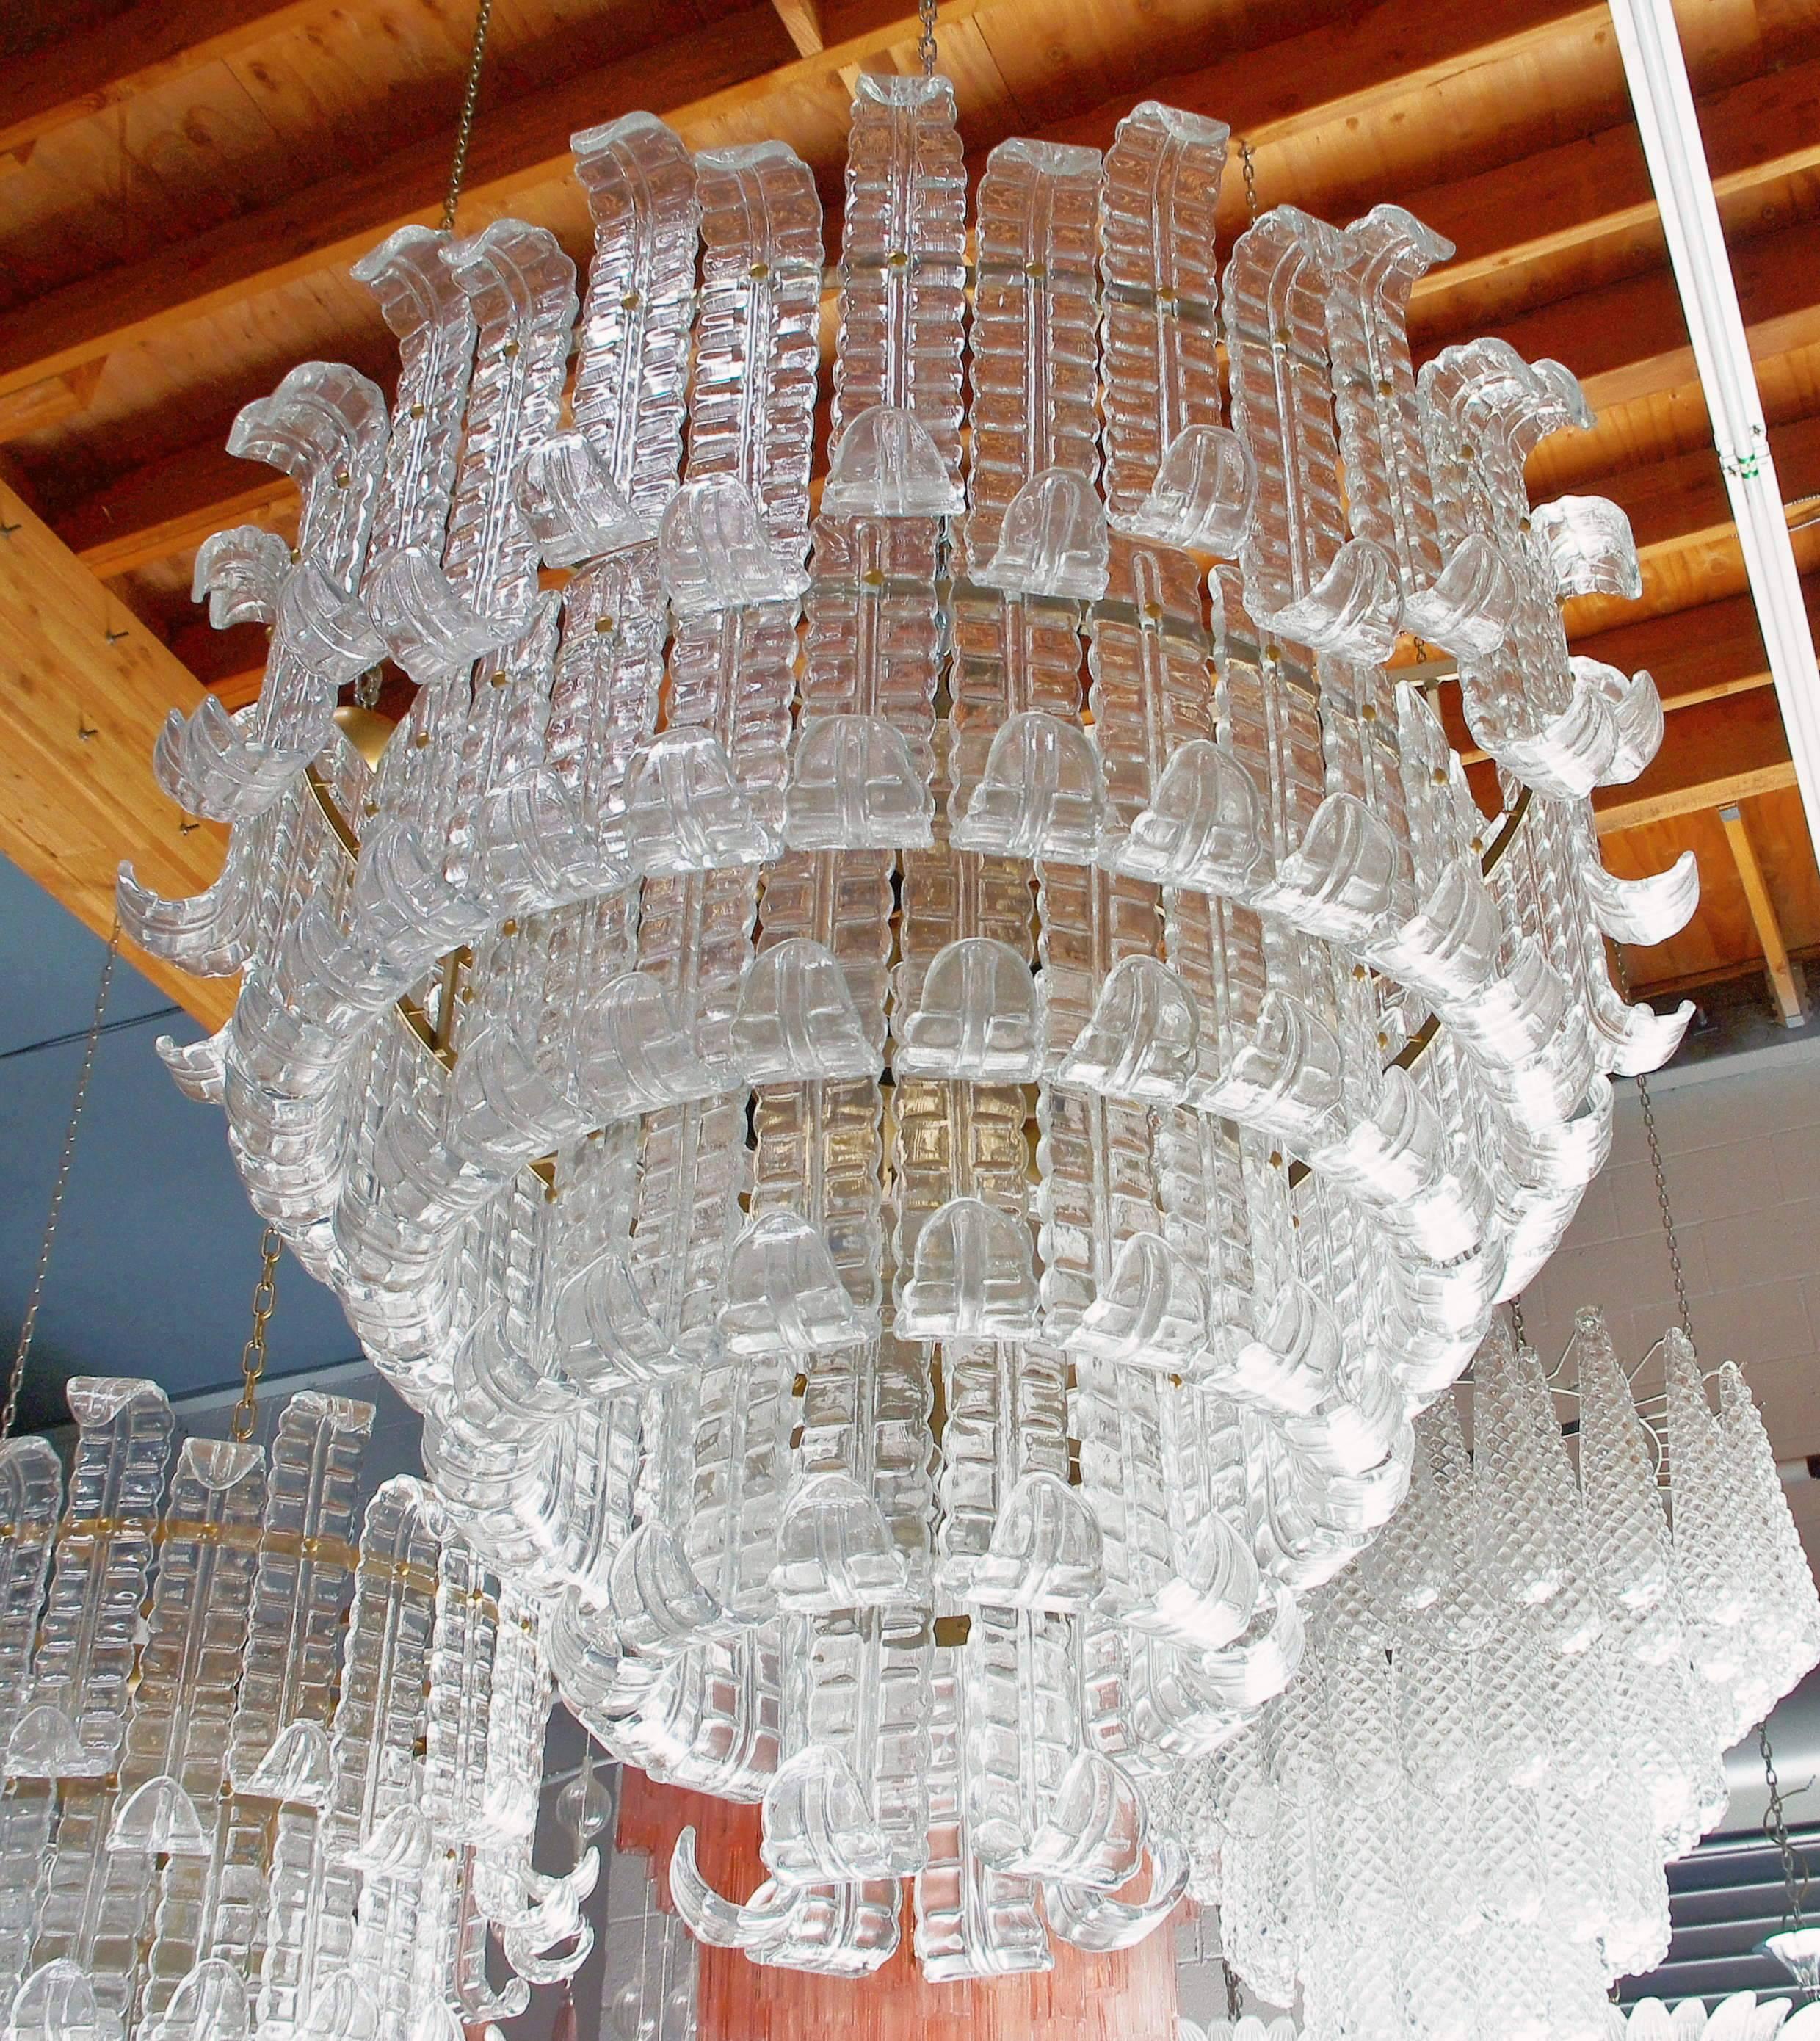 Vintage Italian chandelier with clear Murano glasses with elegantly textured details and curved using Felci technique, mounted on six tiers bronzed frame / Designed by Barovier e Toso circa 1960’s
22 lights / E26 or E27 type / max 60W each
Diameter: